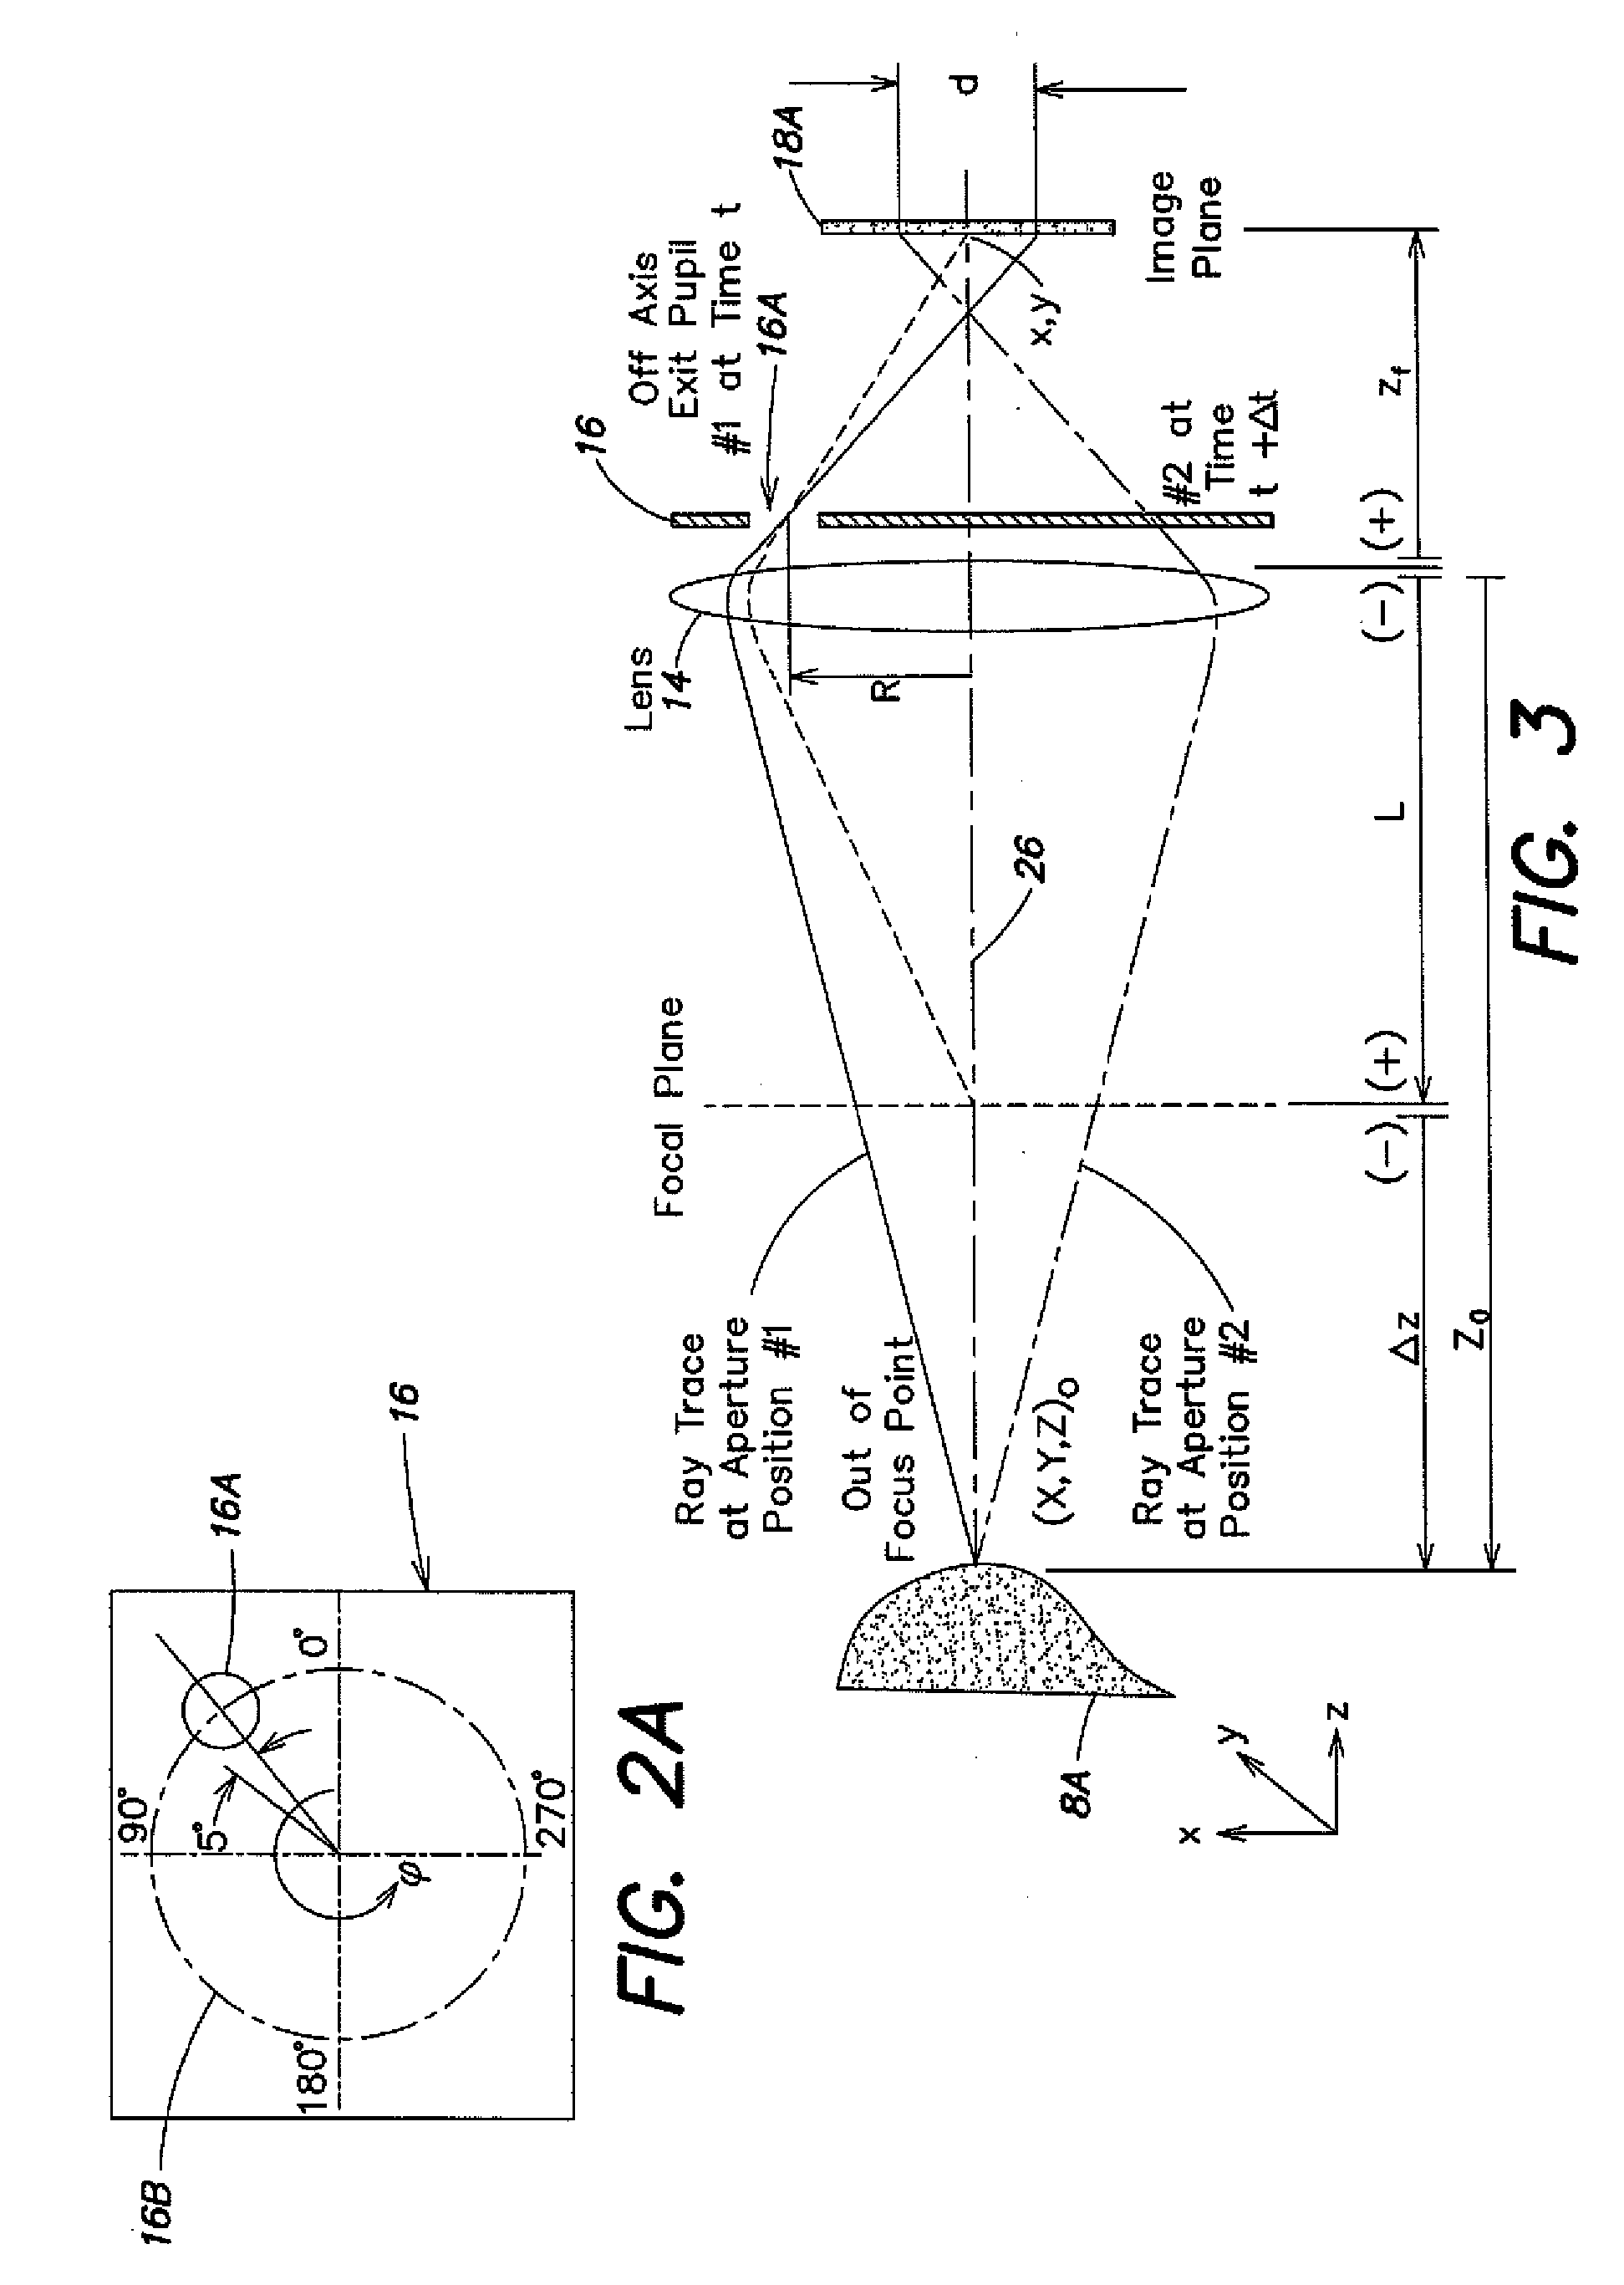 Method and system for high resolution, ultra fast 3-d imaging